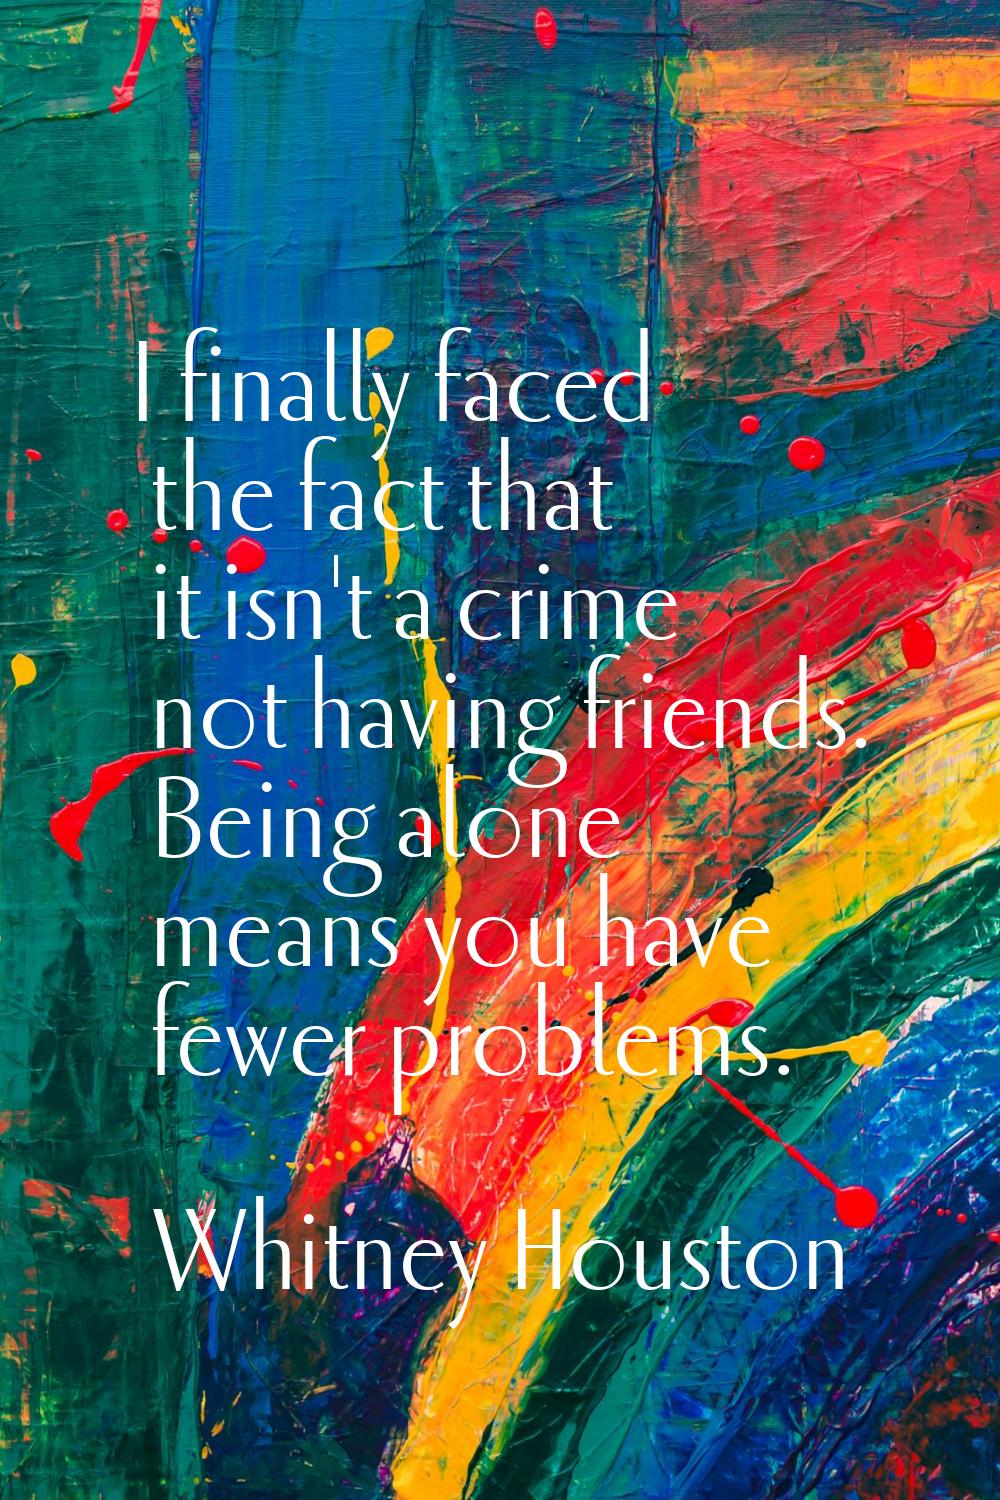 I finally faced the fact that it isn't a crime not having friends. Being alone means you have fewer